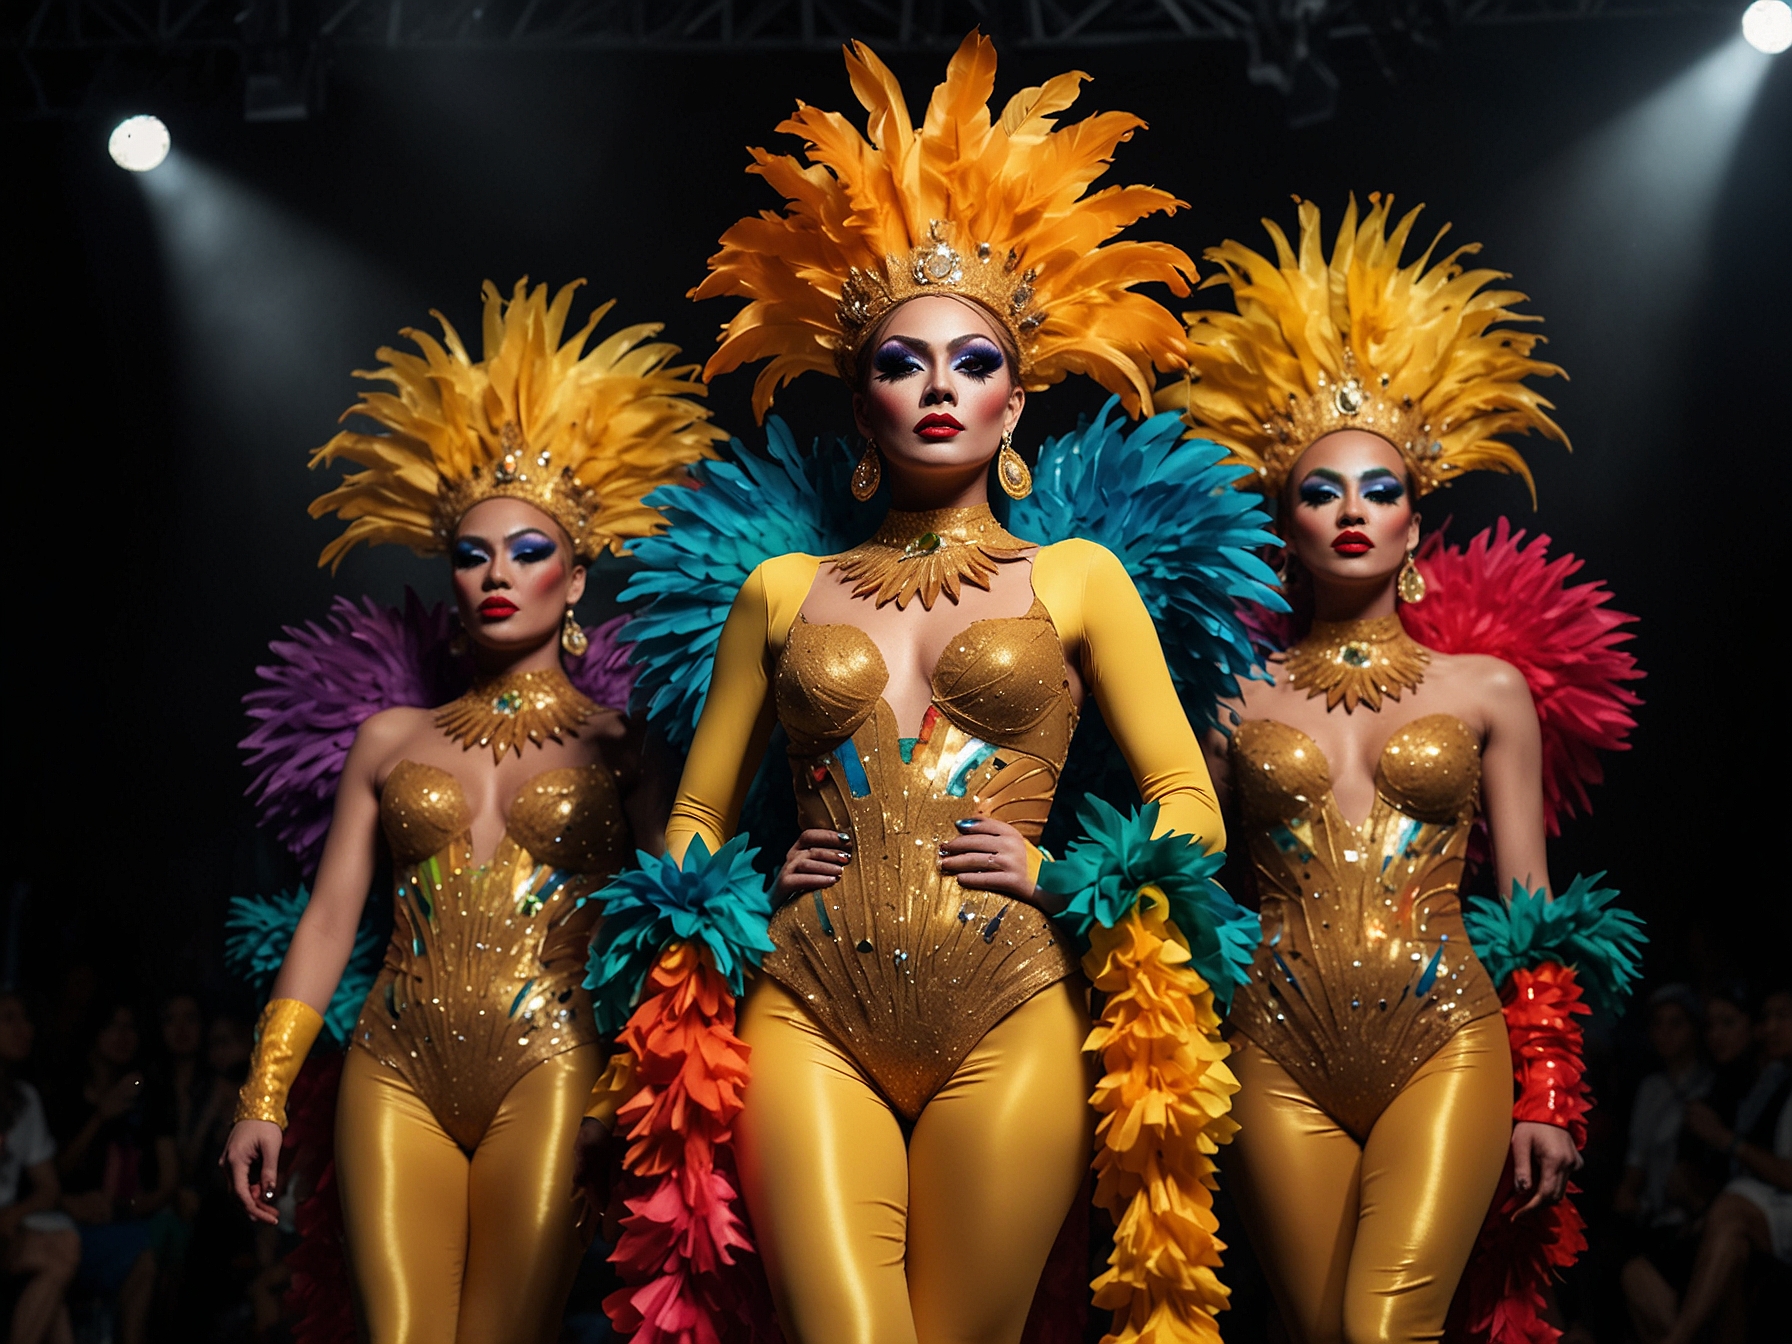 The 'Golden Gays' perform a vibrant drag show in Manila, donning dazzling costumes and makeup, captivating the audience with their energetic and emotional performances.